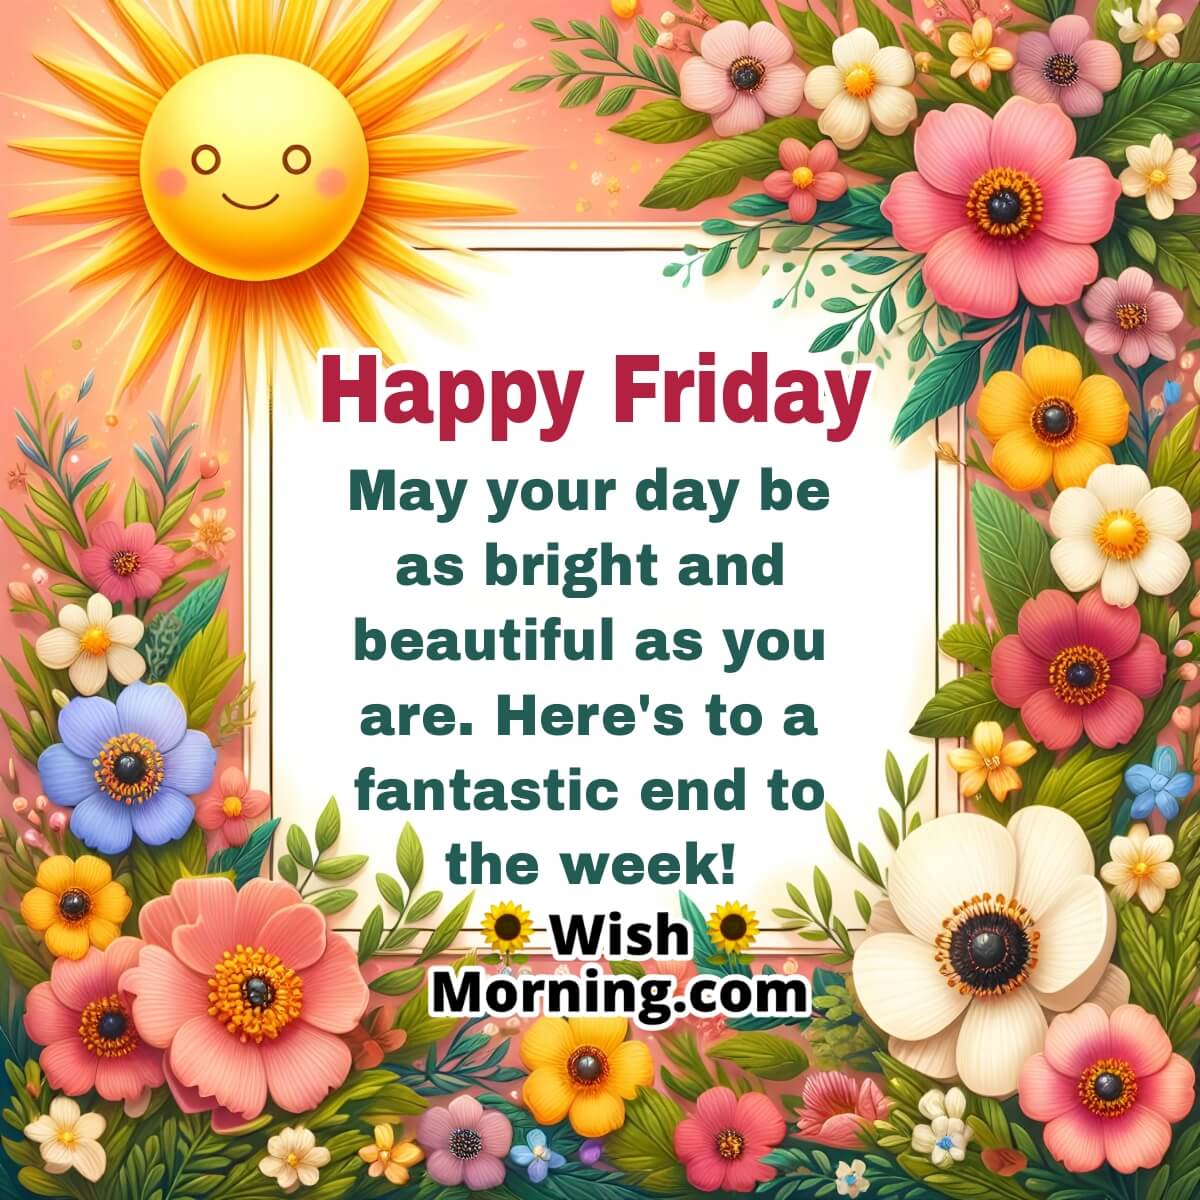 Happy Friday Message Image